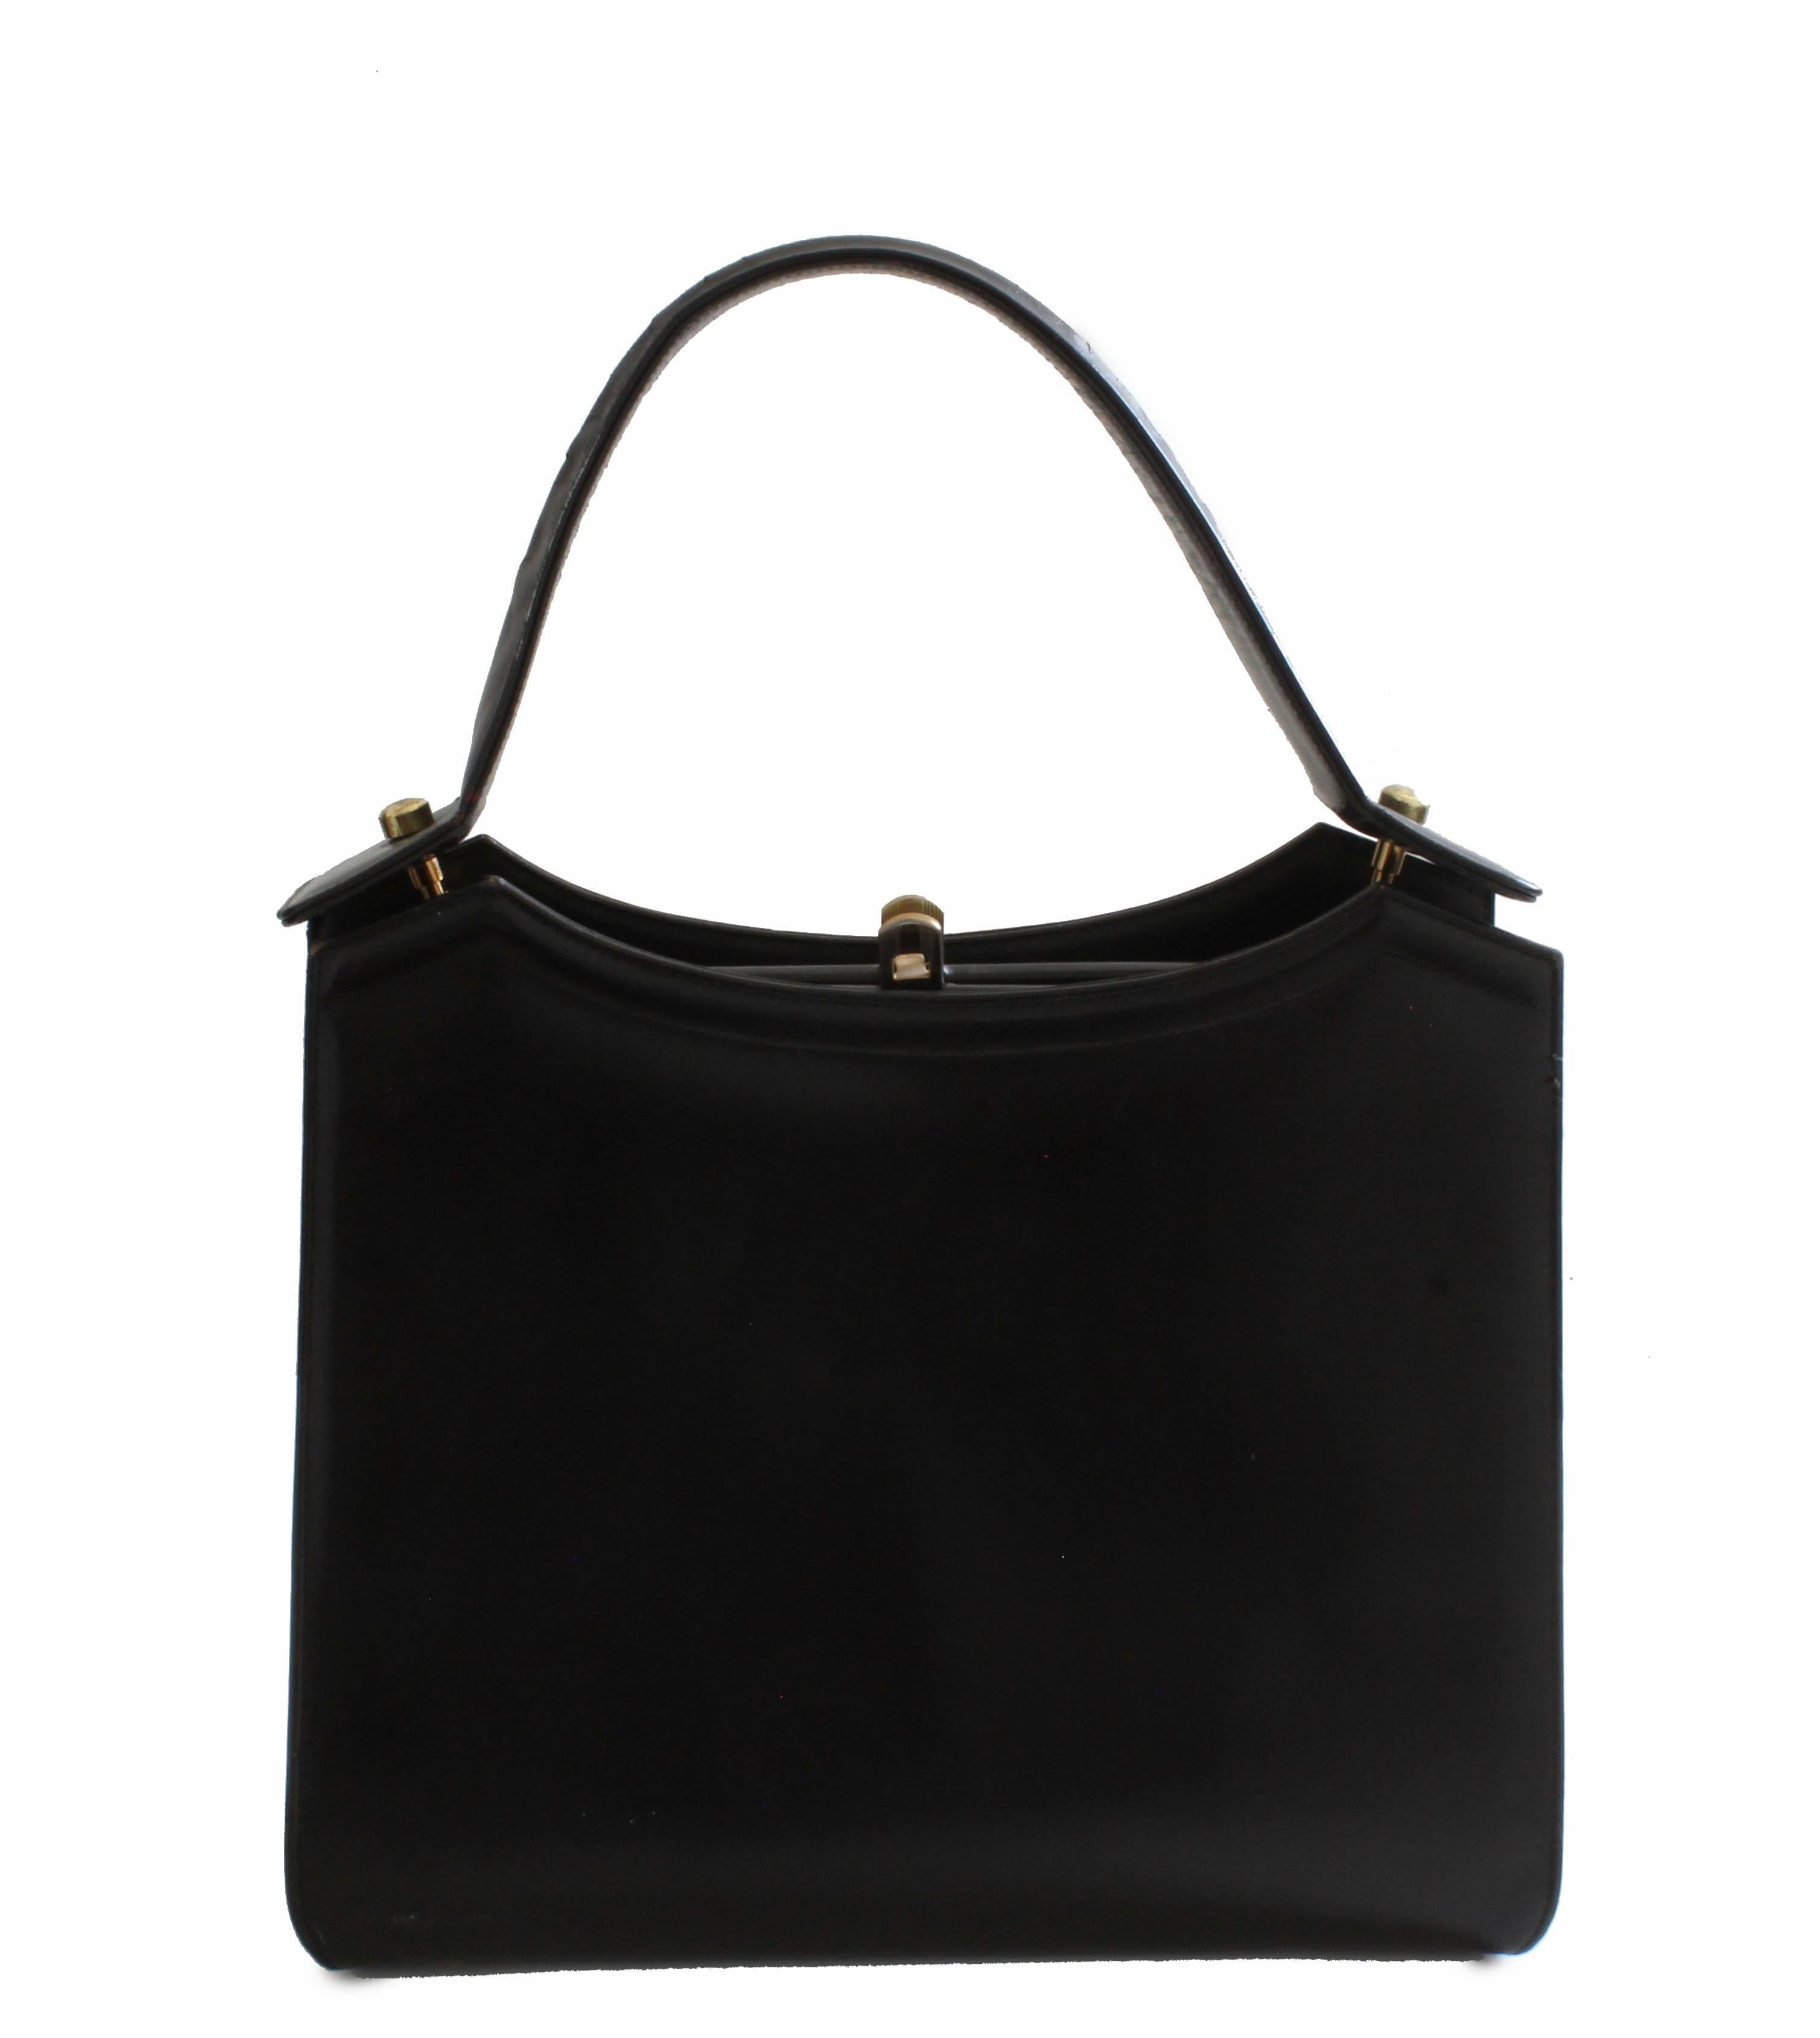 Here's a fabulous black leather bag from Coblentz, most likely made in the early 1960s.  Made from black box leather, this structured bag features brass hardware and a hinged main compartment that's lined in grosgrain fabric with one flat zip pocket